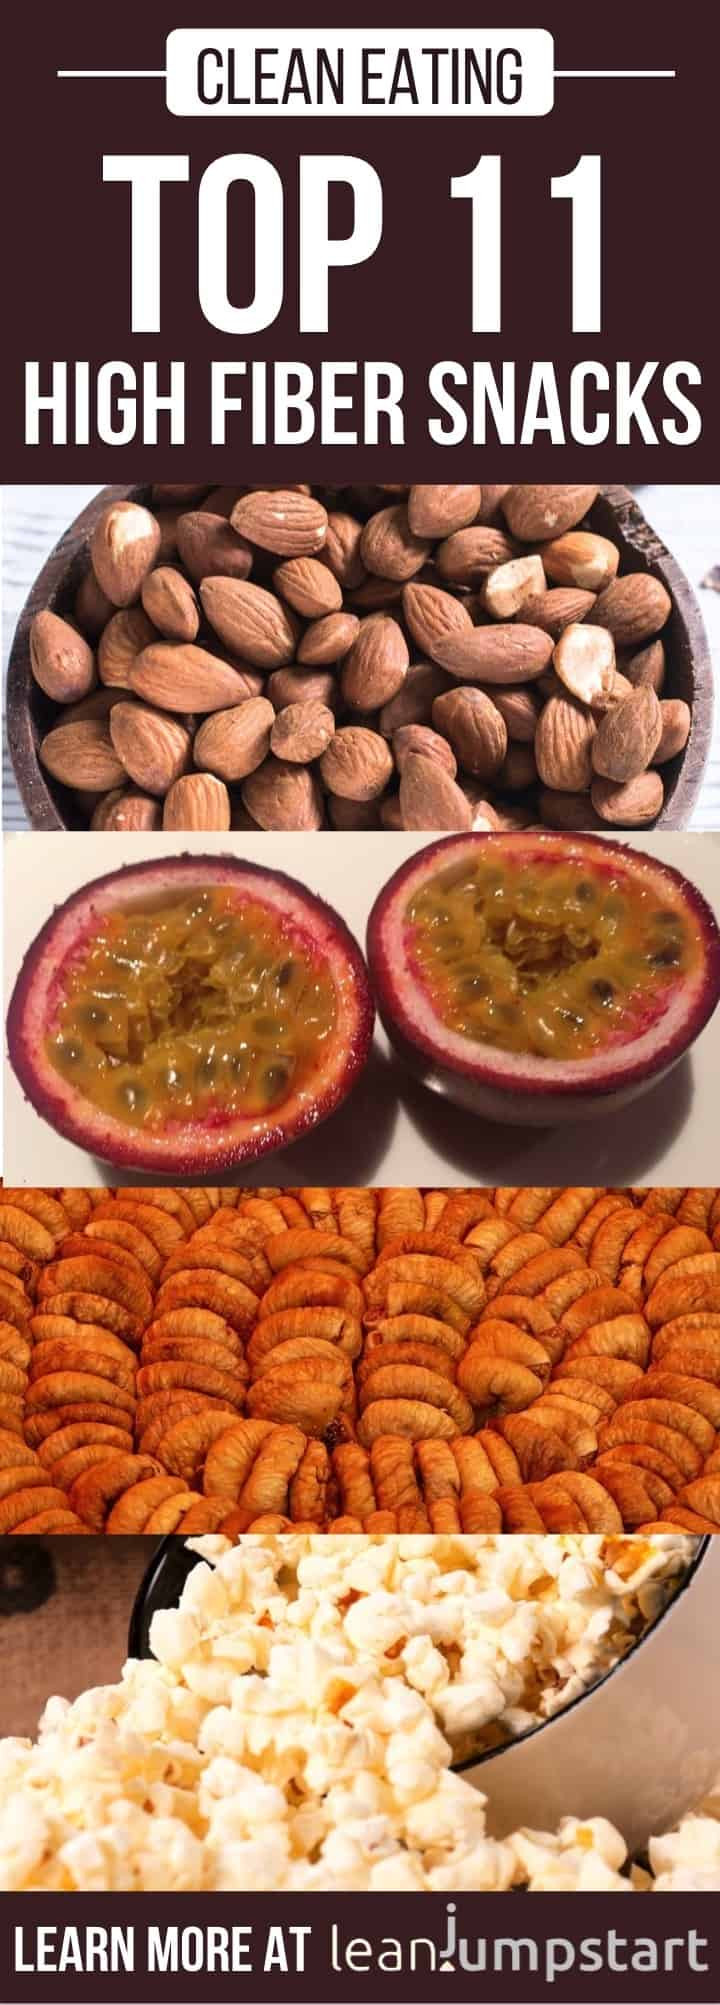 Healthy High Fiber Snacks
 11 High fiber snacks yummy ideas with filling roughage foods